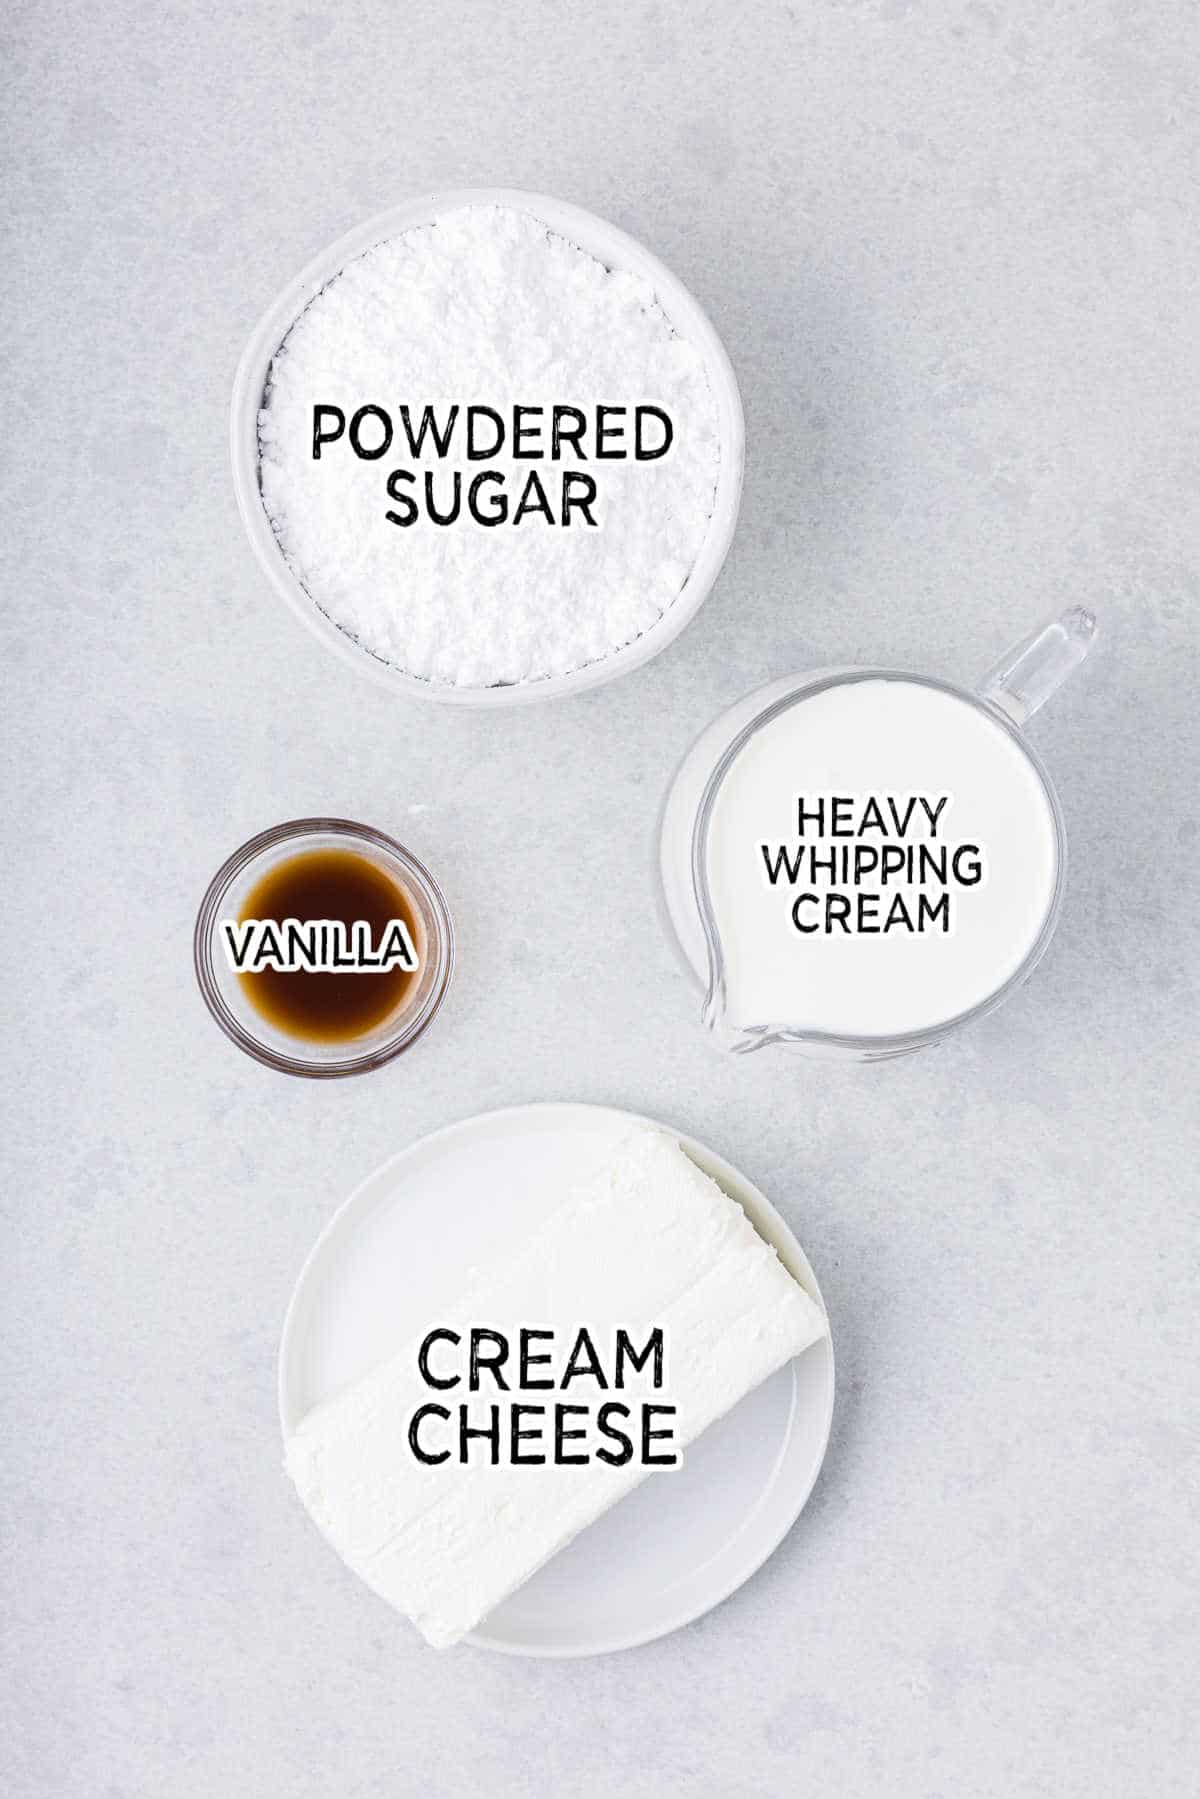 Ingredients to make stabilized whipped cream.